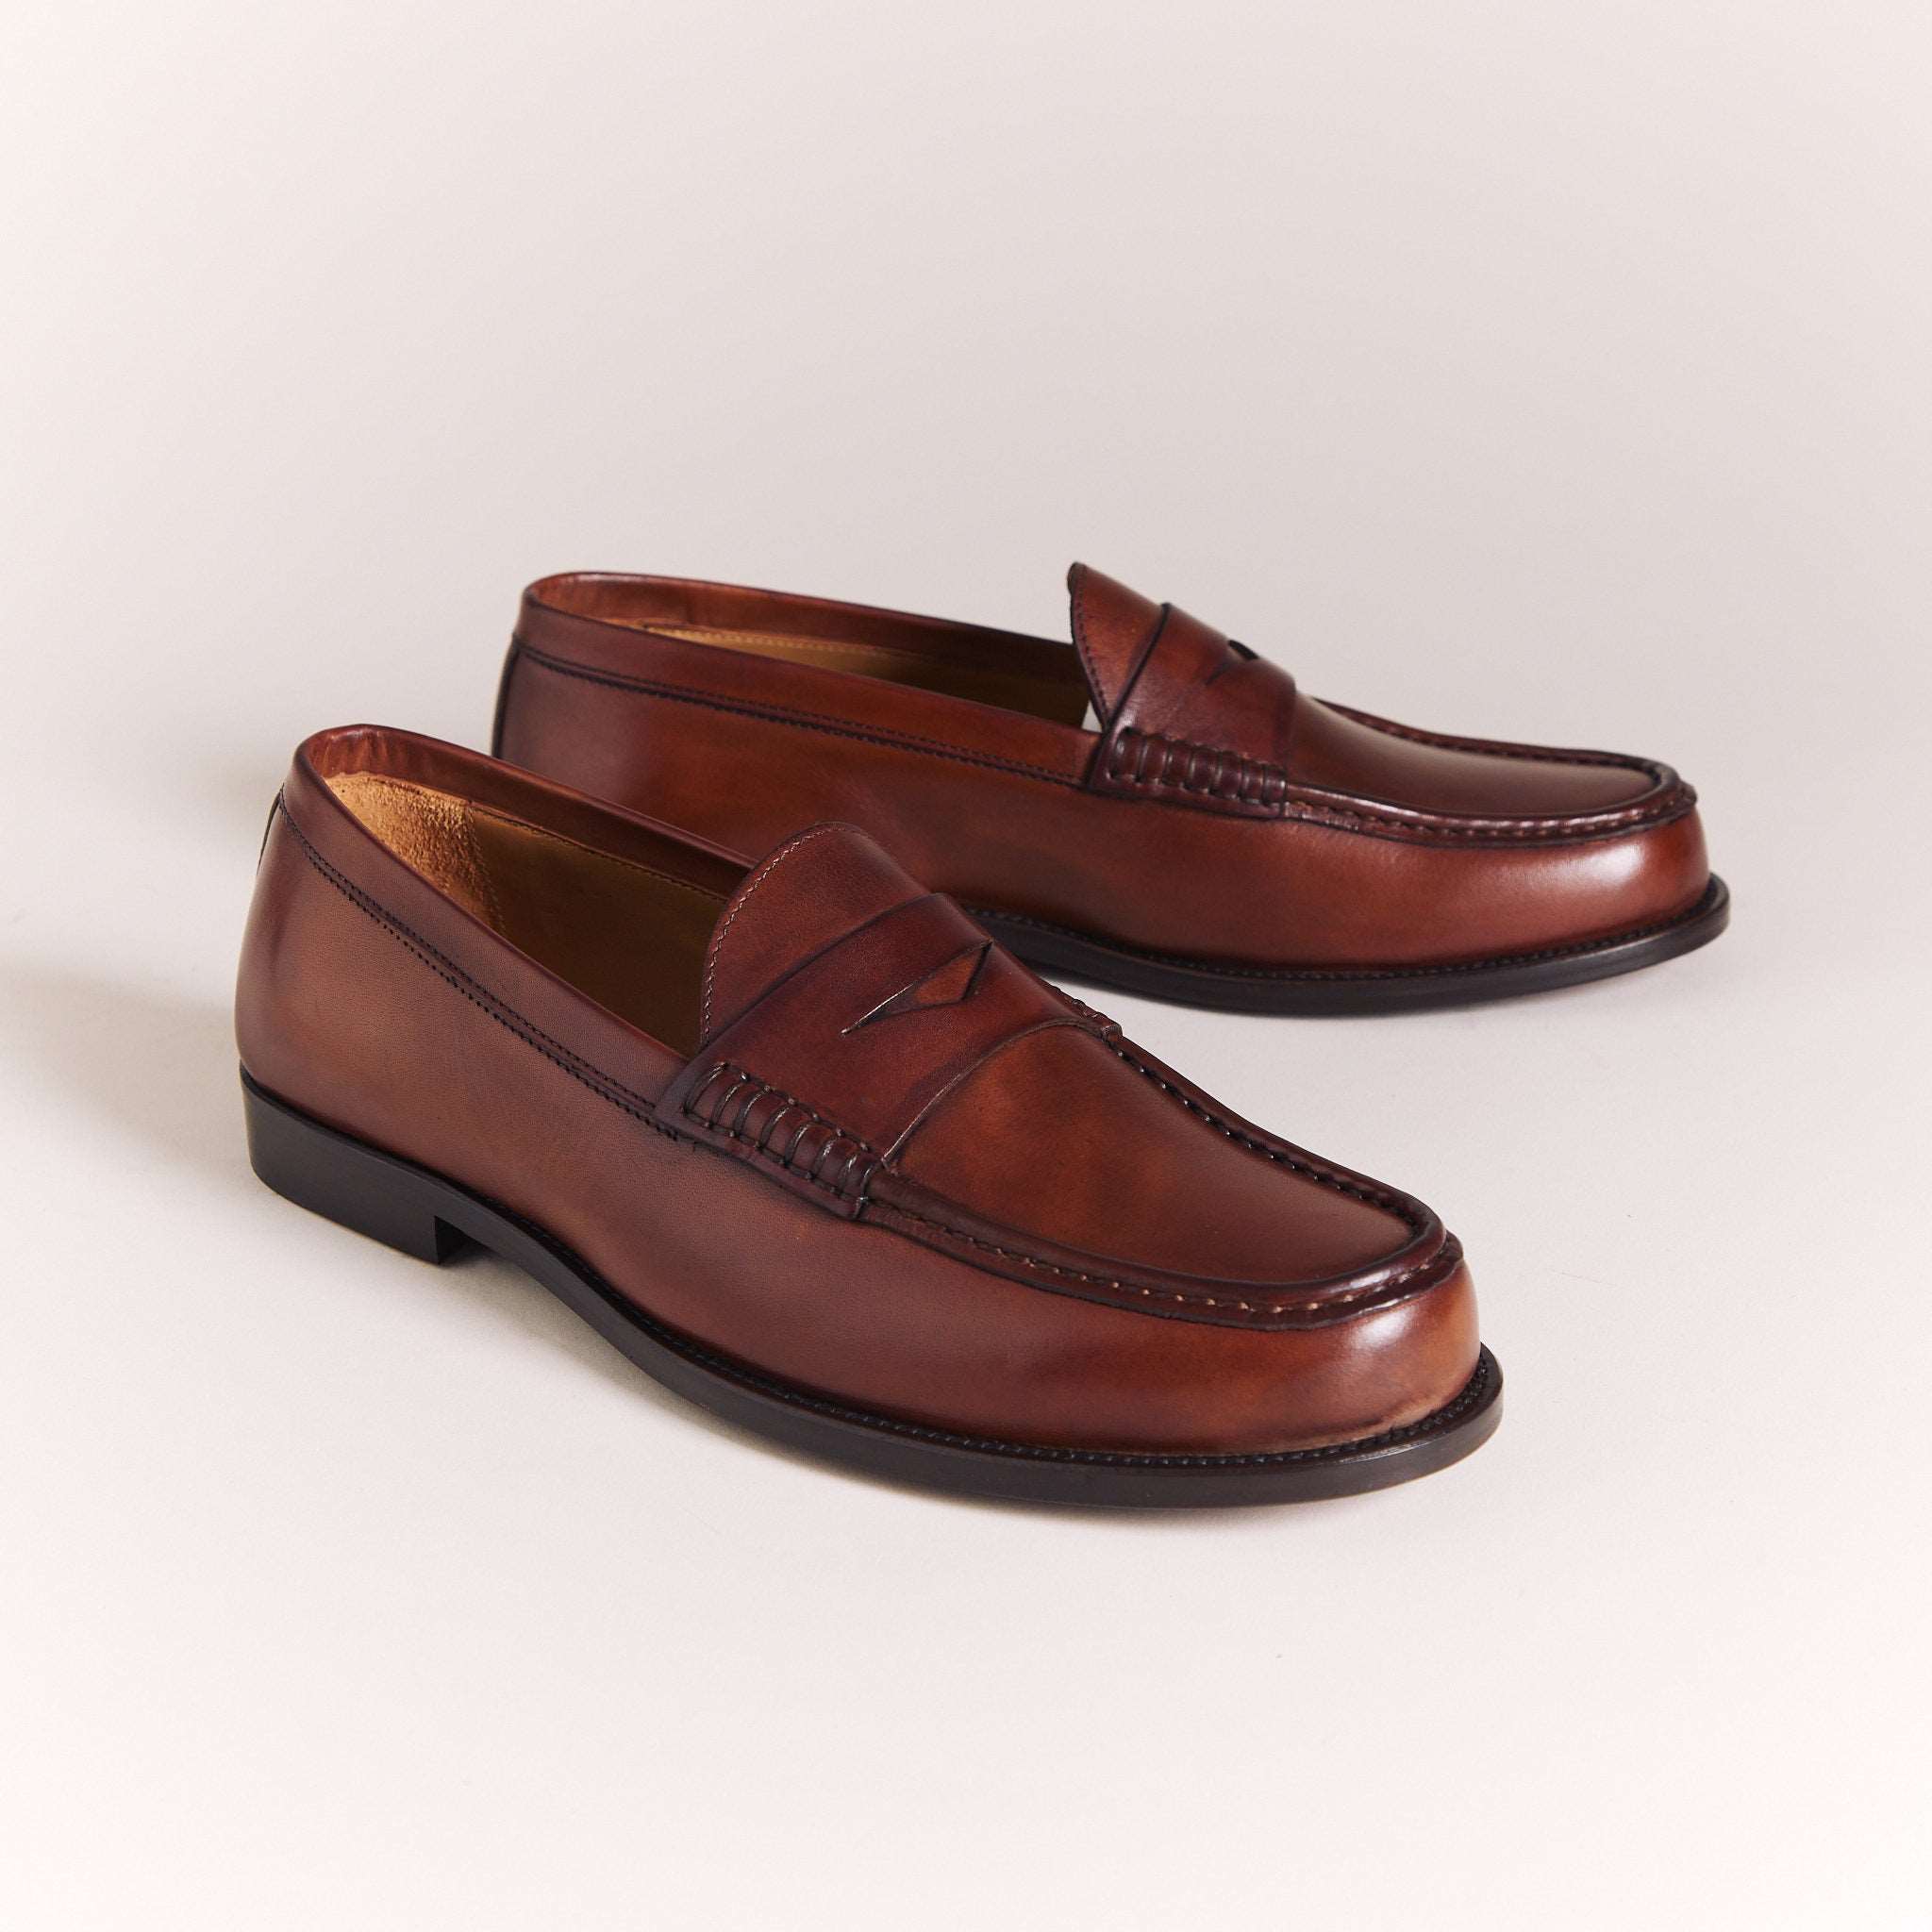 Italian Loafers for Men | Cognac Brown 'Cente' Penny Loafers